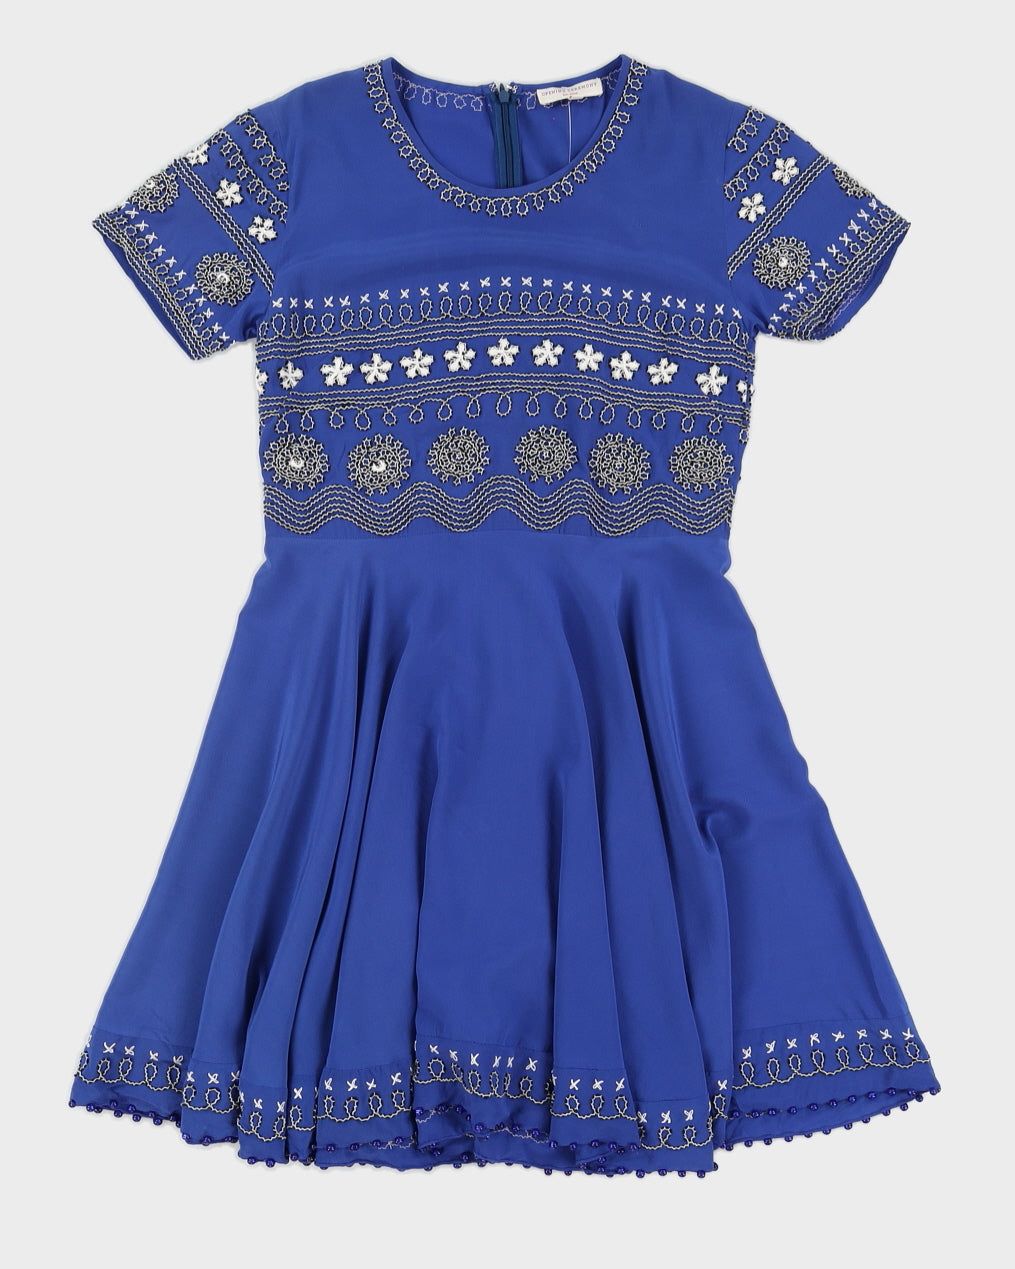 Blue Silk Embroidered Dress - S